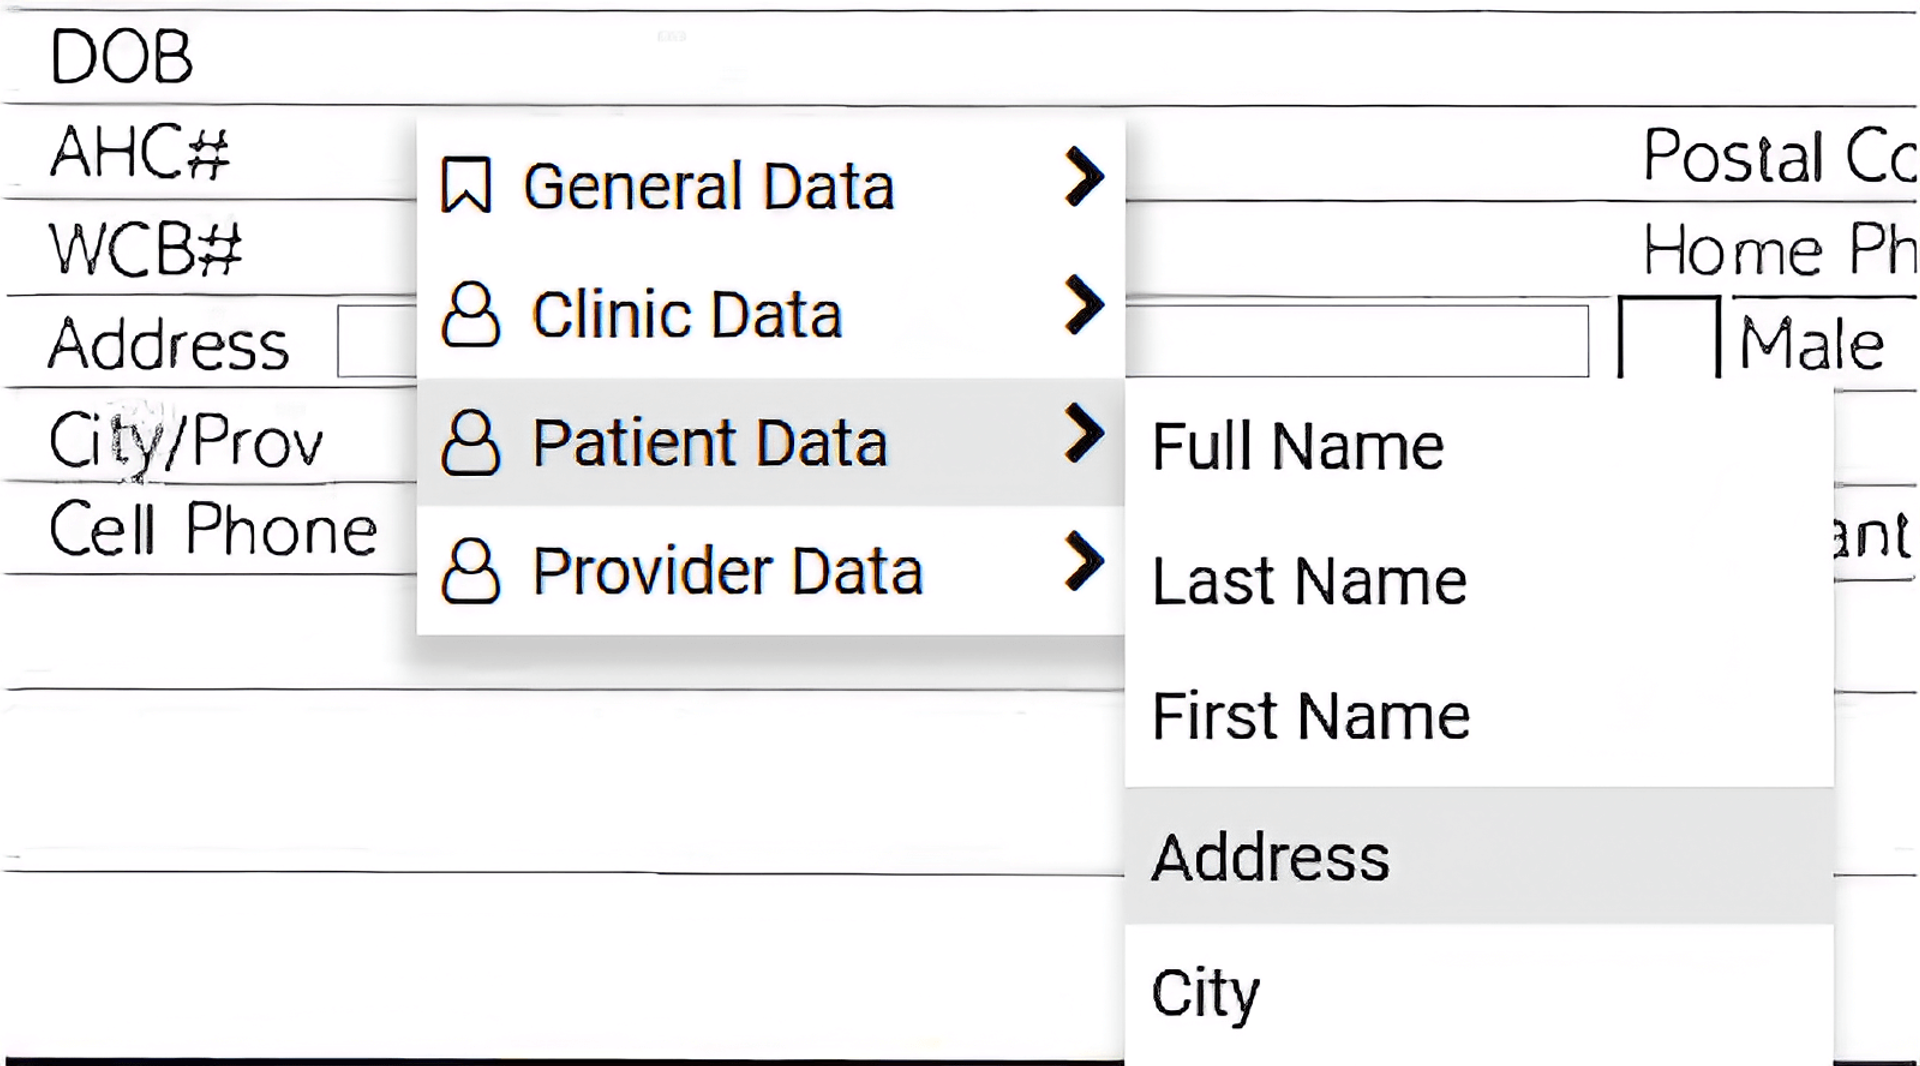 Patient Data dropdown open, displaying the options: Full Name, Last Name, First Name, Address, and City.